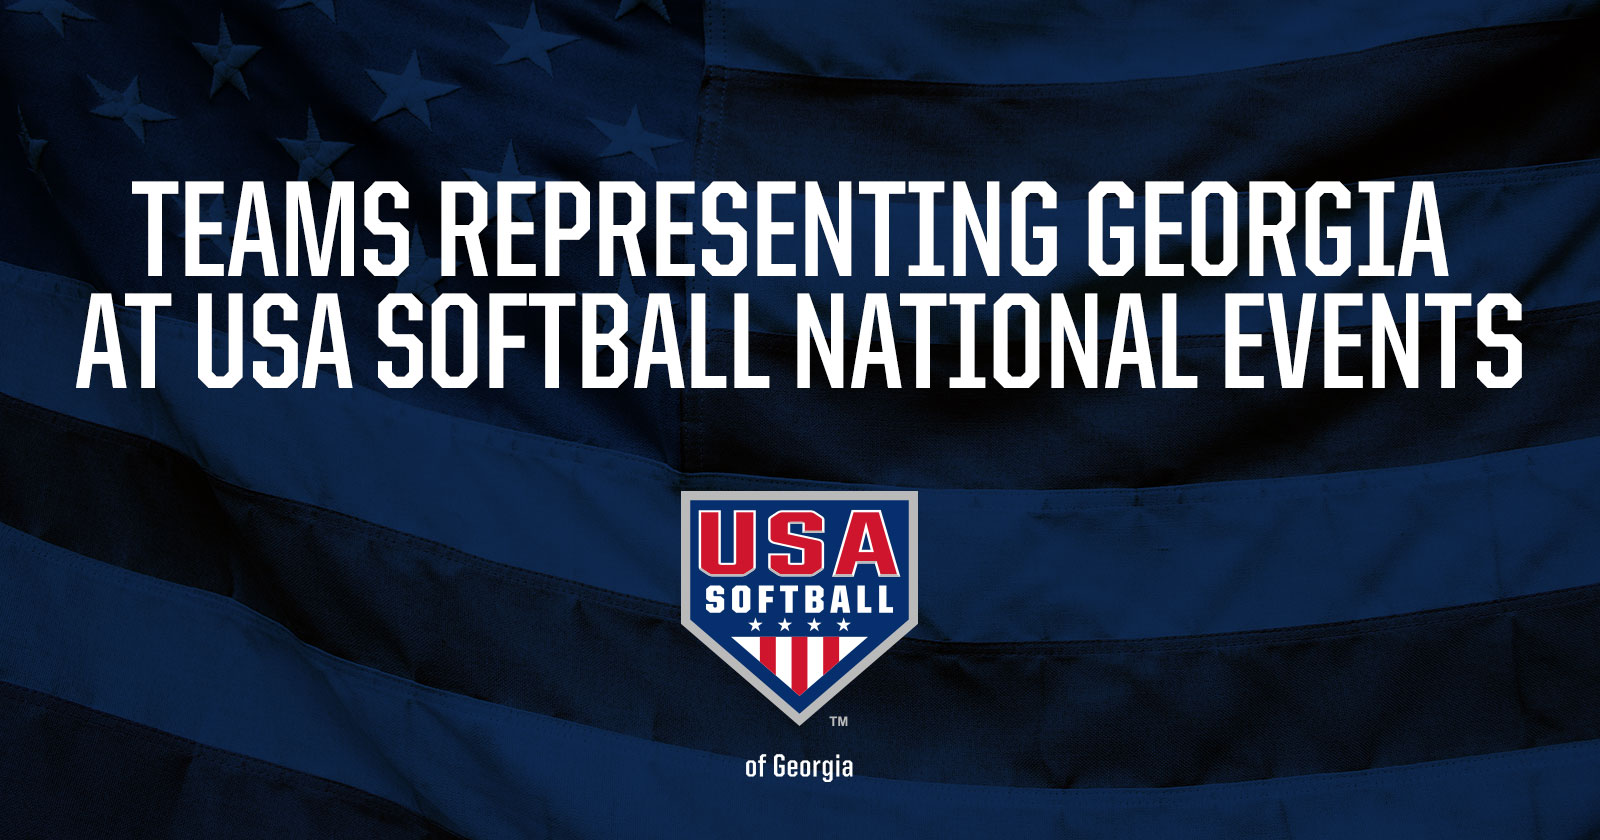 Teams Representing Georgia At Usa Softball National Events In 2020